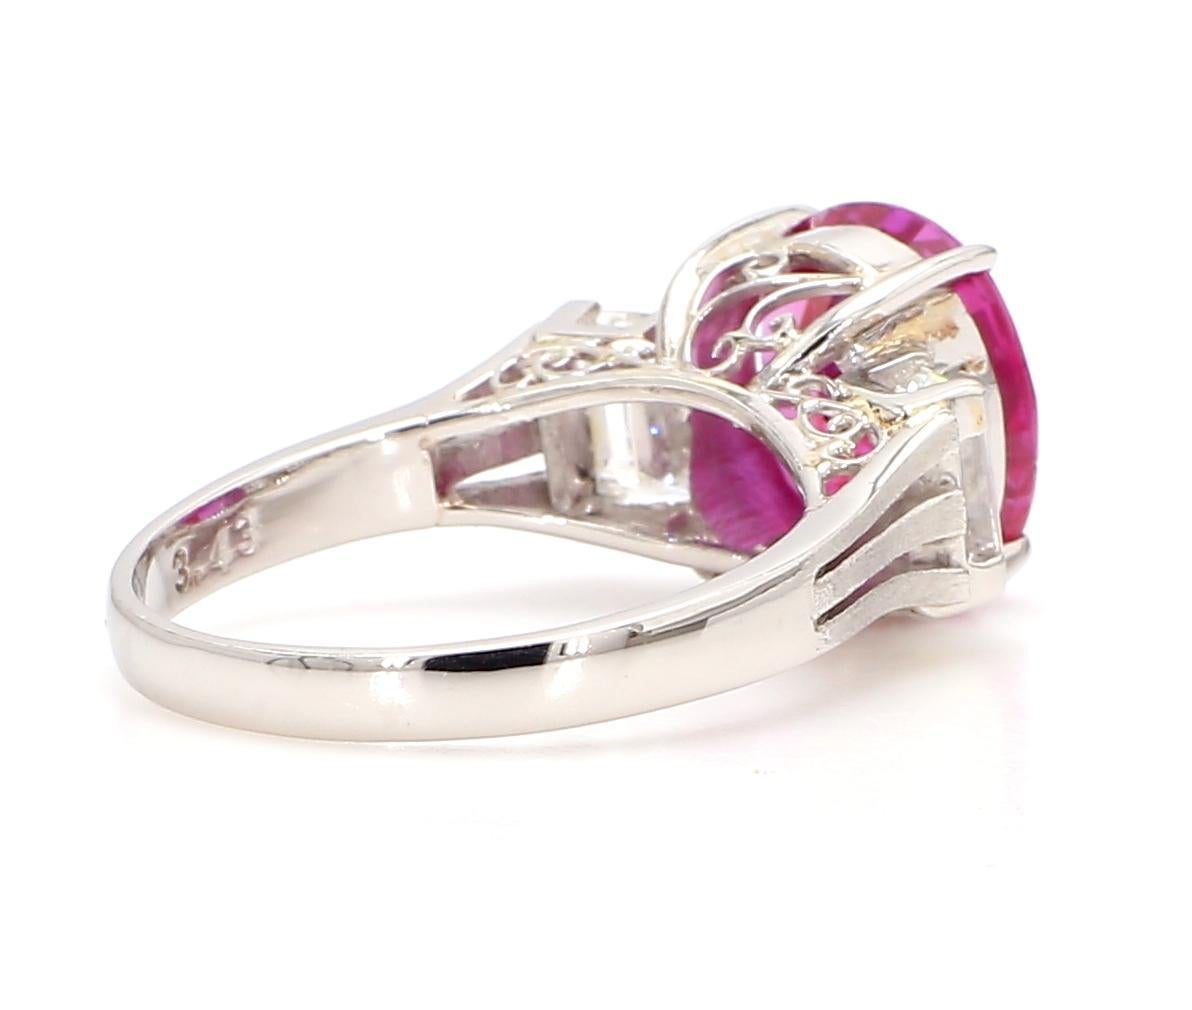 Women's 3 Carat Ruby and 1.2 Carat Diamond Platinum Ring For Sale